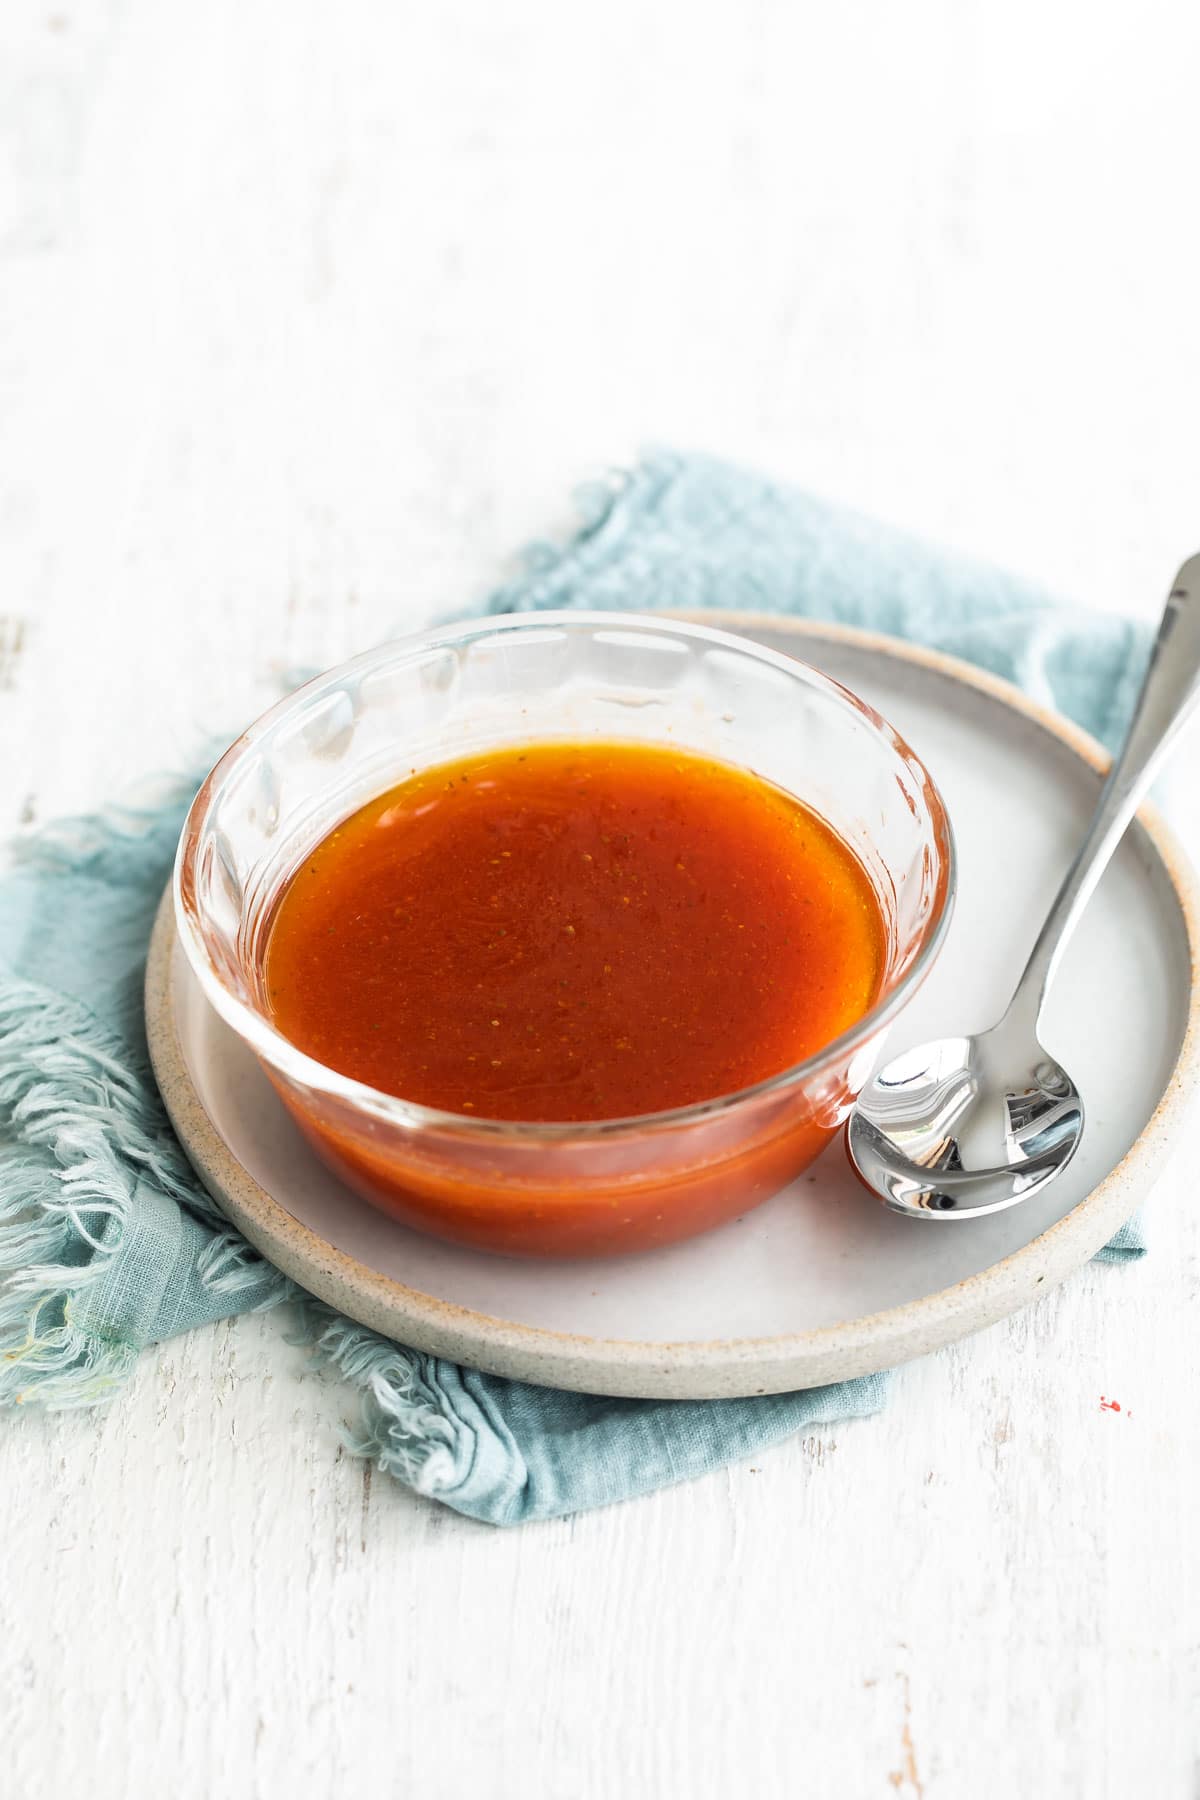 A bowl of homemade French dressing.